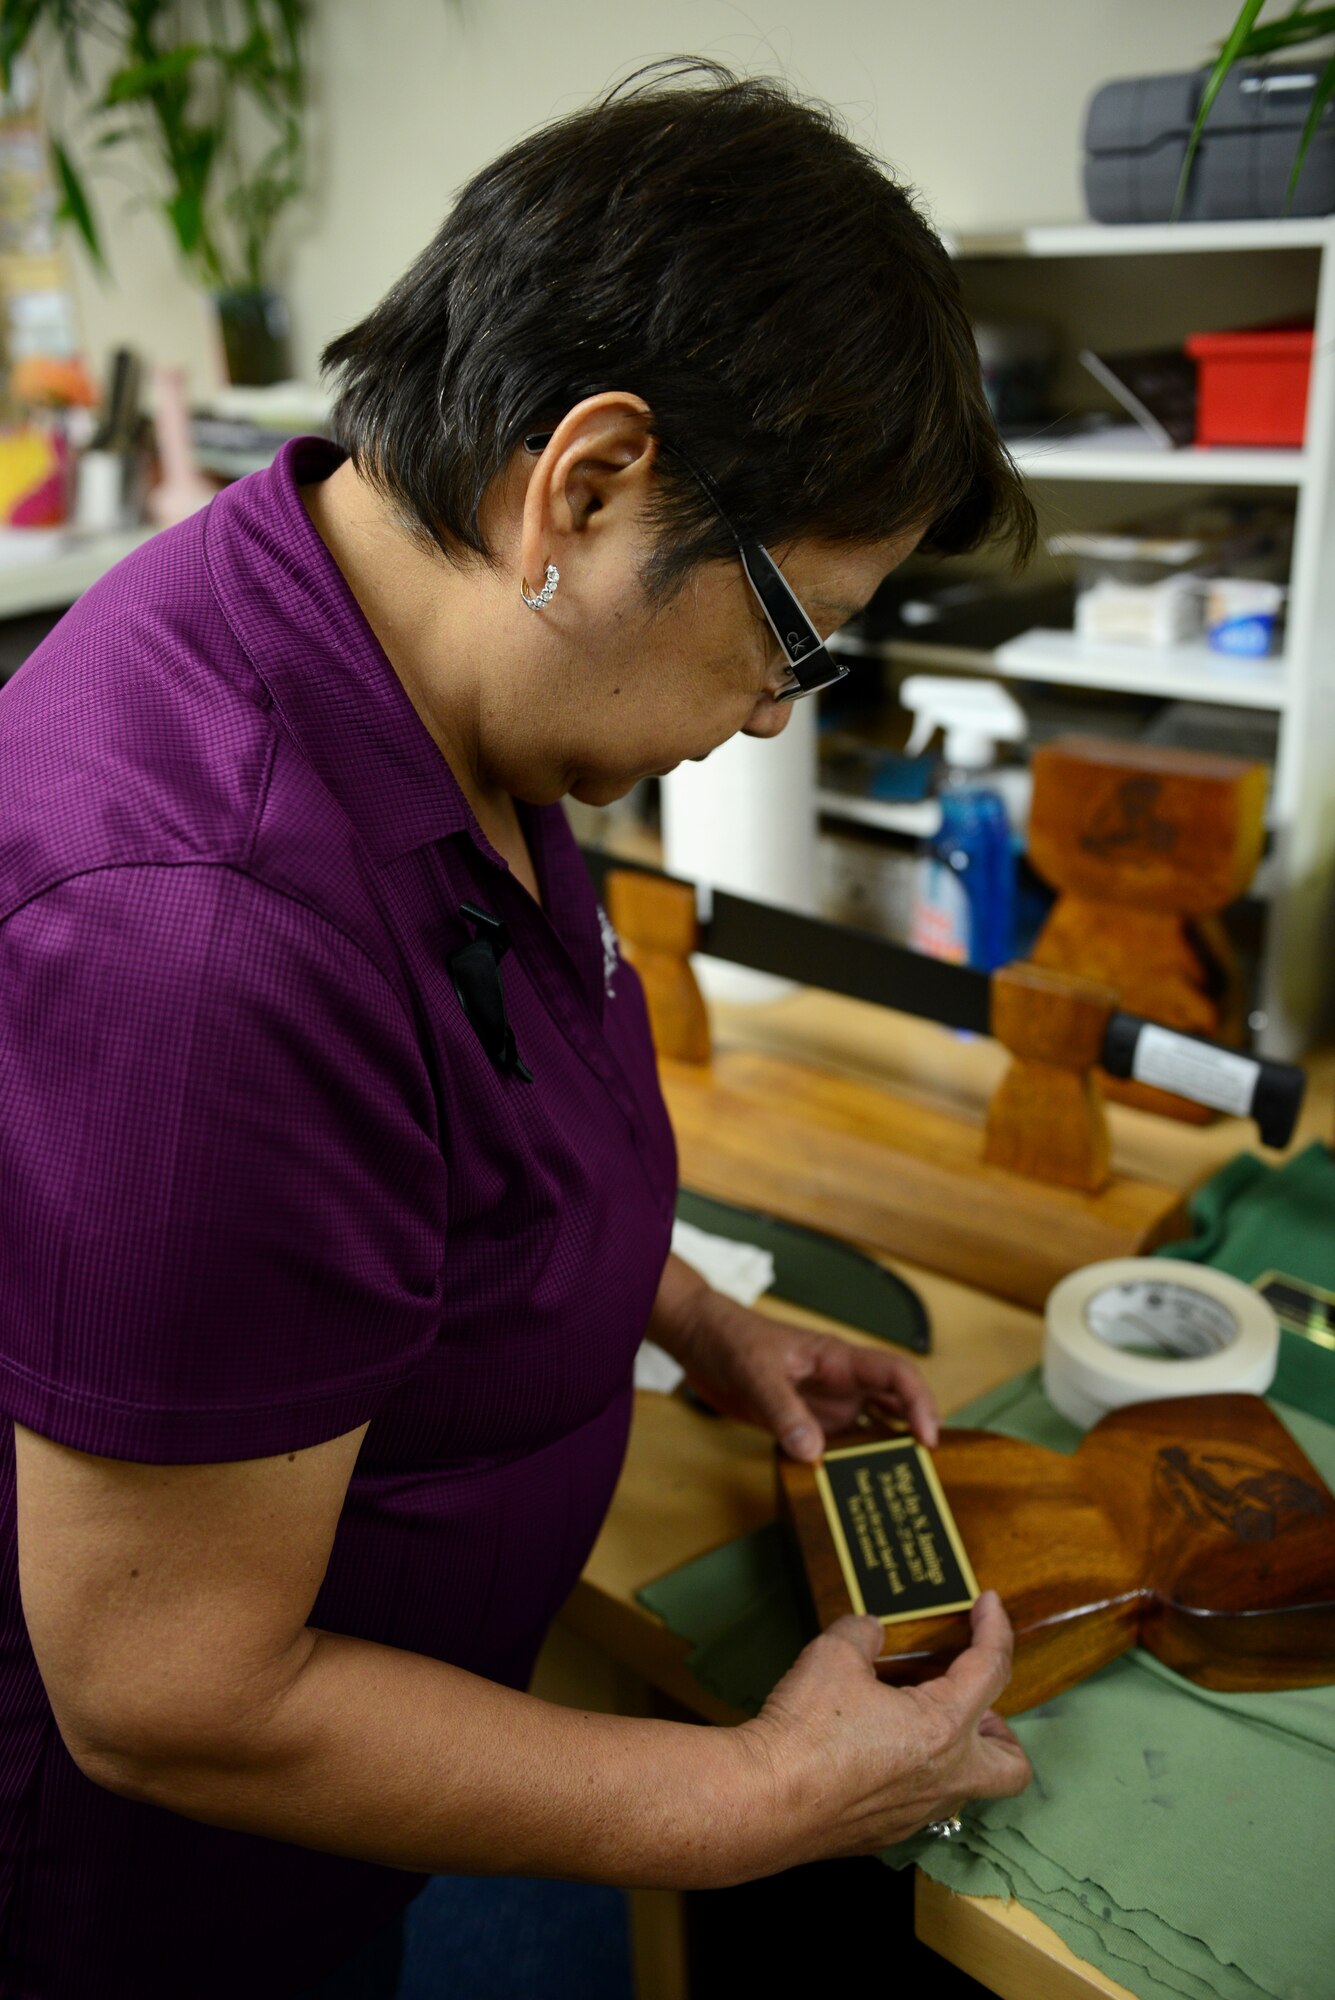 Ofelia Regis, 36th Force Support Squadron Arts and Crafts Center recreation assistant, centers a name plate on an award June 10, 2015, at Andersen Air Force Base, Guam. The Arts and Crafts Center provides engraving and framing services as well as a wide variety of classes for people of all ages. (U.S. Air Force photo by Airman 1st Class Arielle Vasquez/Released)